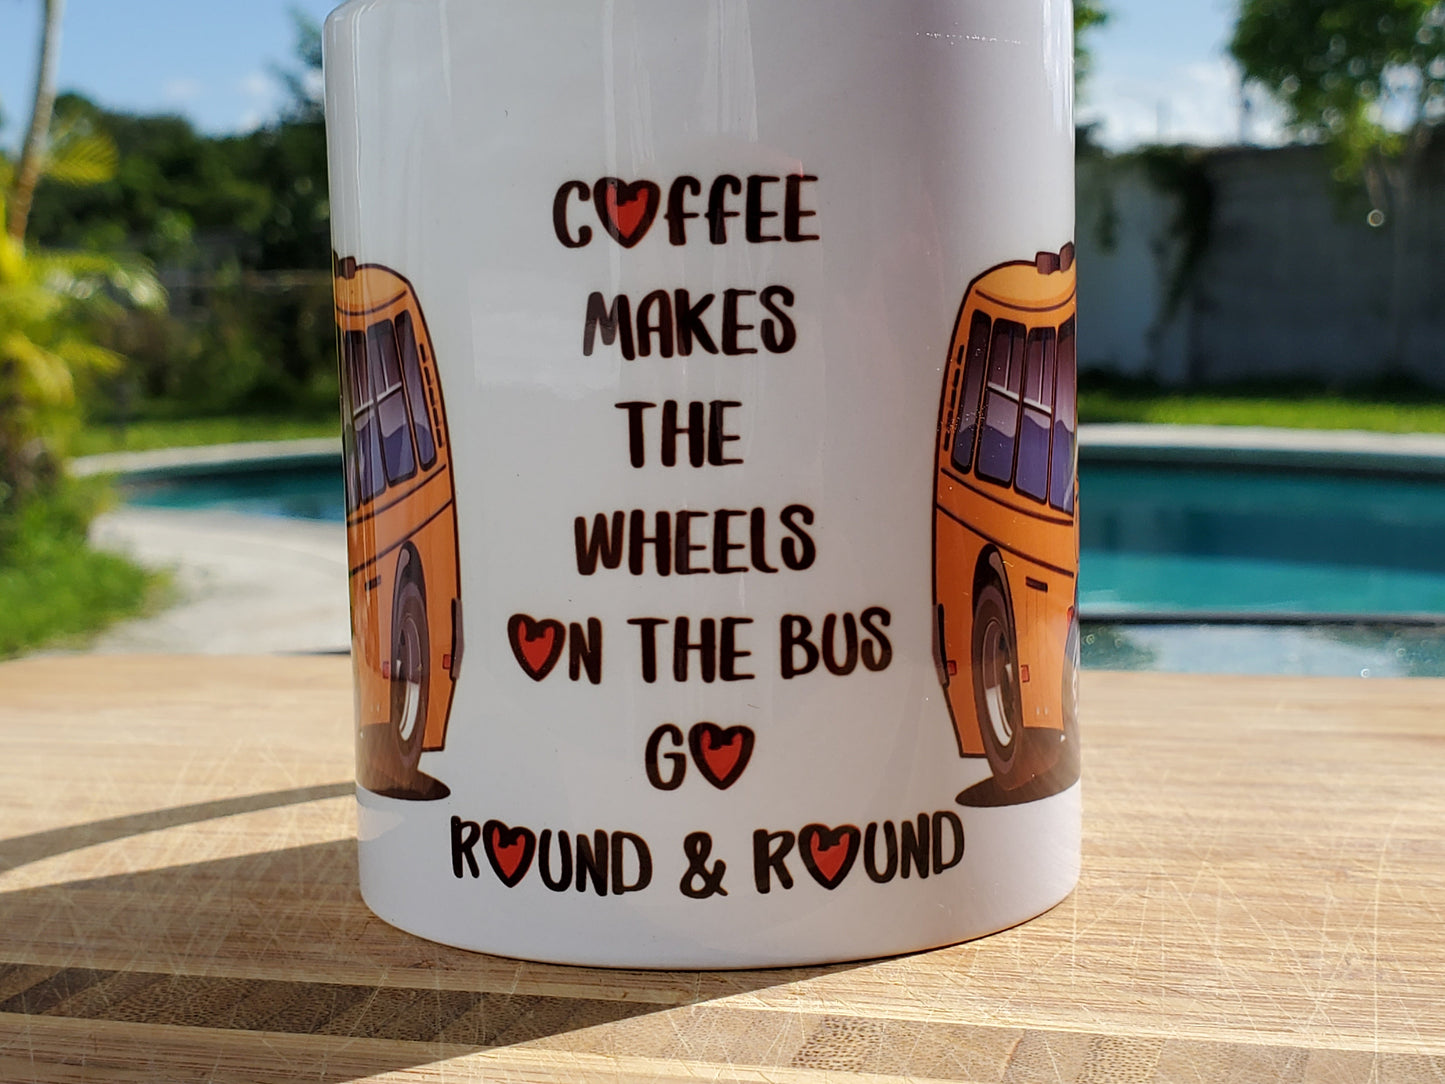 Custom Printed 11 ounce Coffee Mug Makes The Wheels On The Bus Go Round. Crisp Print that can be personalized. Great Way To Start a Day